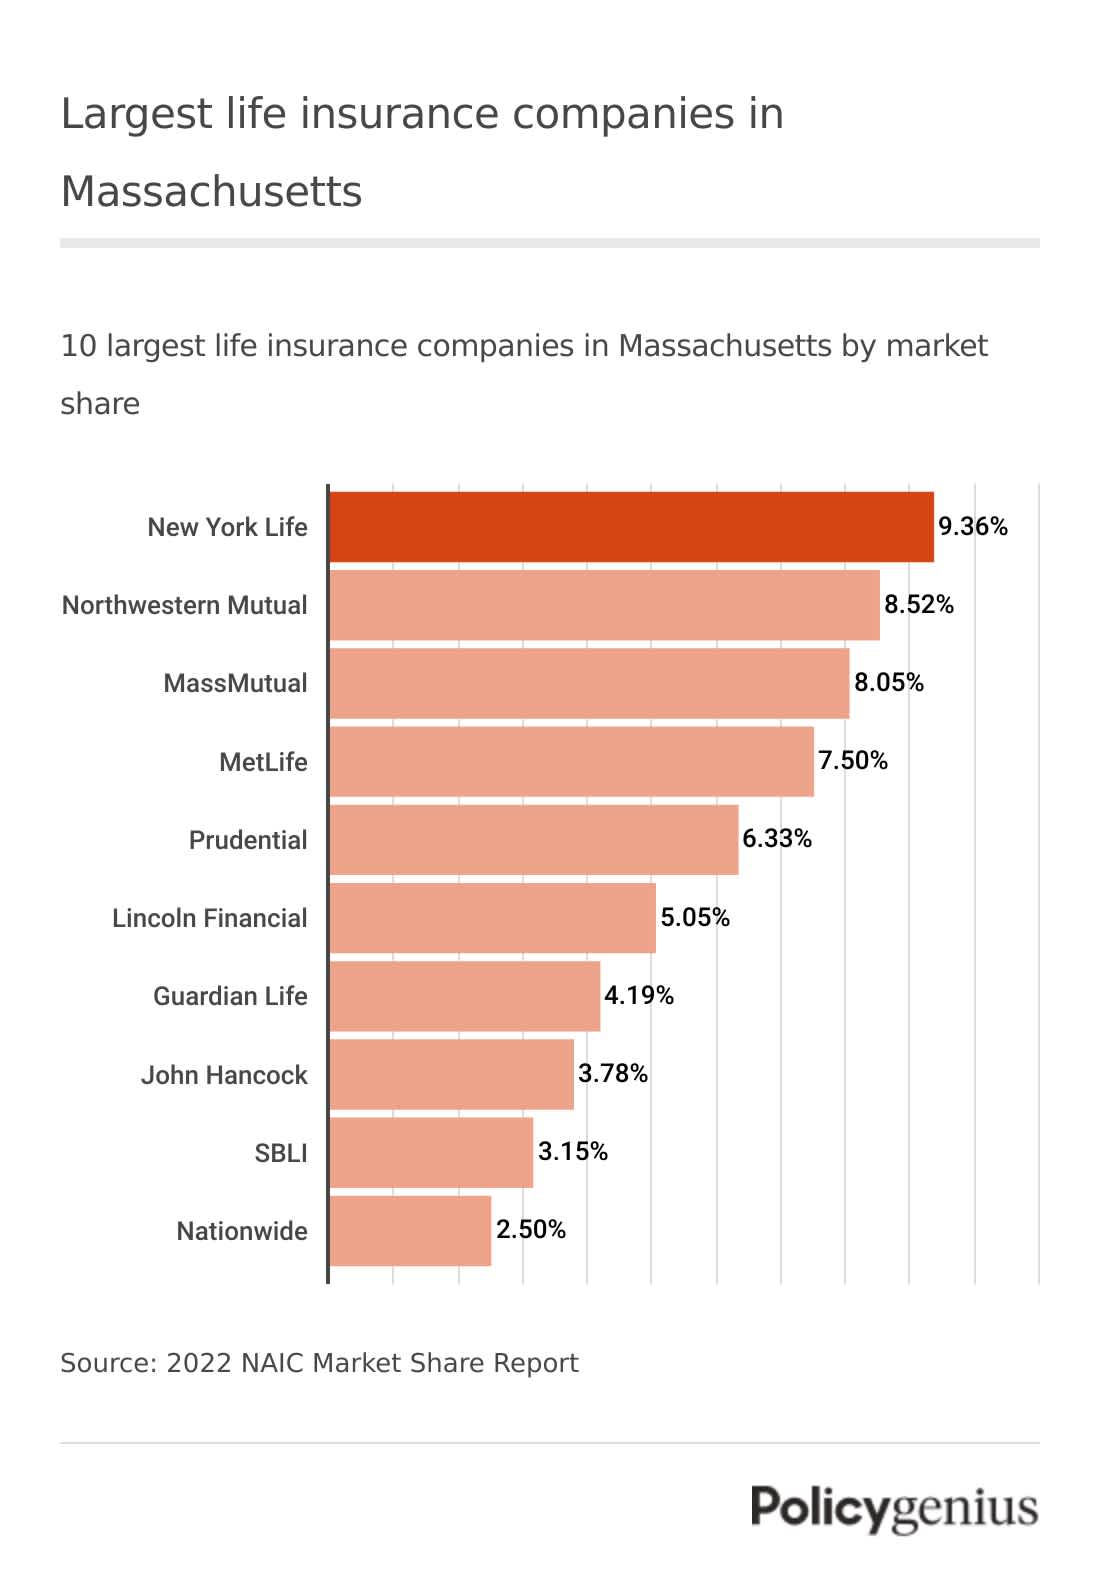 A bar graph showing the largest life insurance companies in Massachusetts